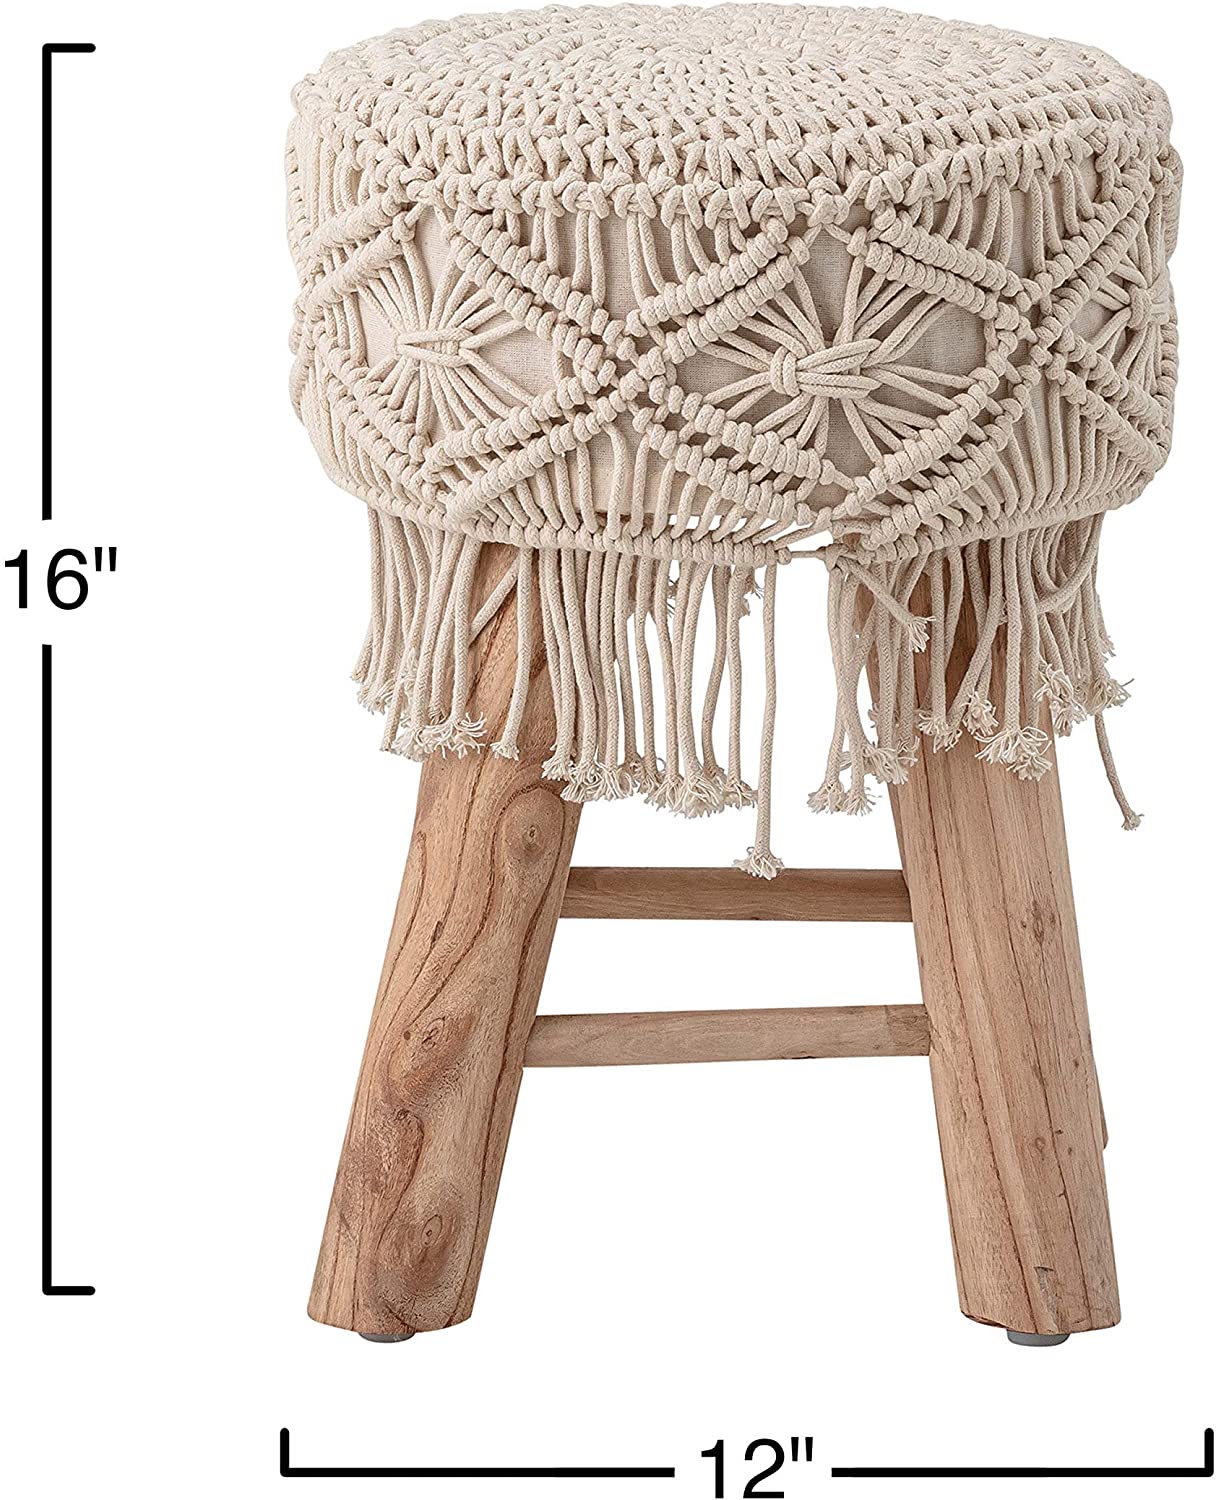 Macrame and Mango Wood Stool - Natural - 16-in - Mellow Monkey